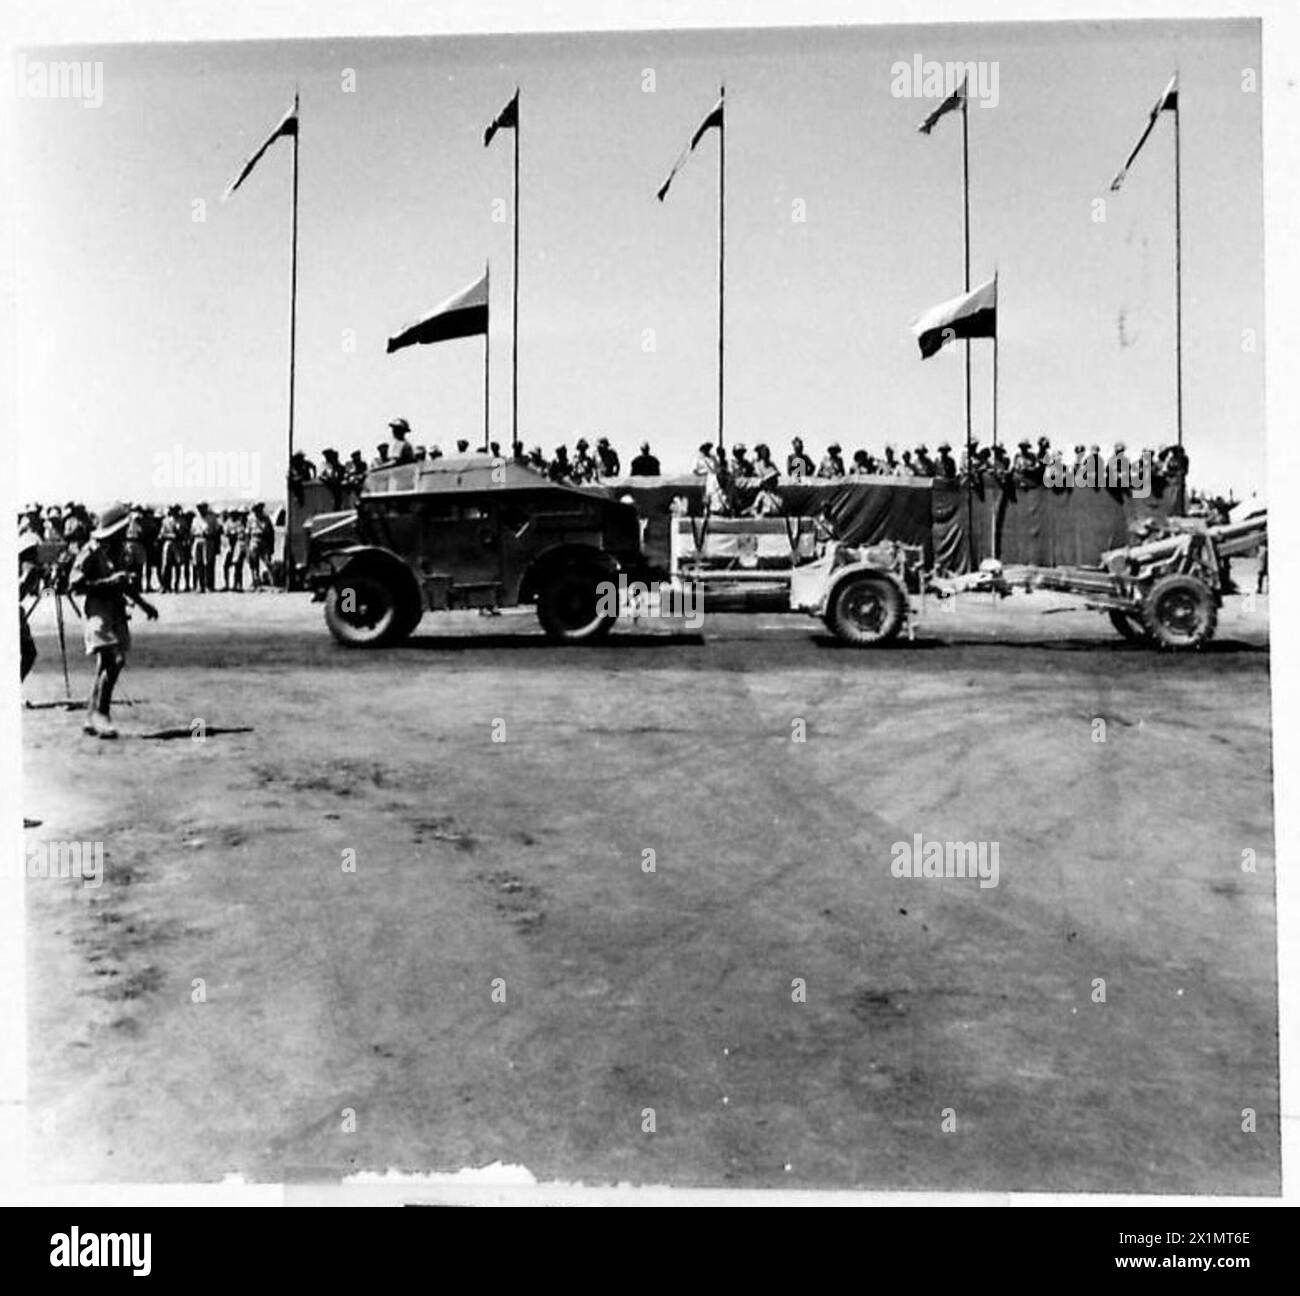 THE POLISH ARMY IN THE MIDDLE EAST, 1942-1943 - Ordnance QF 25 pounder gun towed by a Morris Commercial C8 Field Artillery Tractor (Quad) passing by a stage where General Władysław Sikorski, the Commander-in-Chief of the Polish Armed Forces, is watching a parade of one of the units of the 5th Wilno Infantry Division, at their camp around Kirkuk. Photograph taken during General Władysław Sikorski's official tour in Iraq, Polish Army, Polish Armed Forces in the West, Polish Corps, II, Polish Armed Forces in the West, Polish Army in the Soviet Union, 5th 'Wilno' Infantry Division, Sikorski, Włady Stock Photo